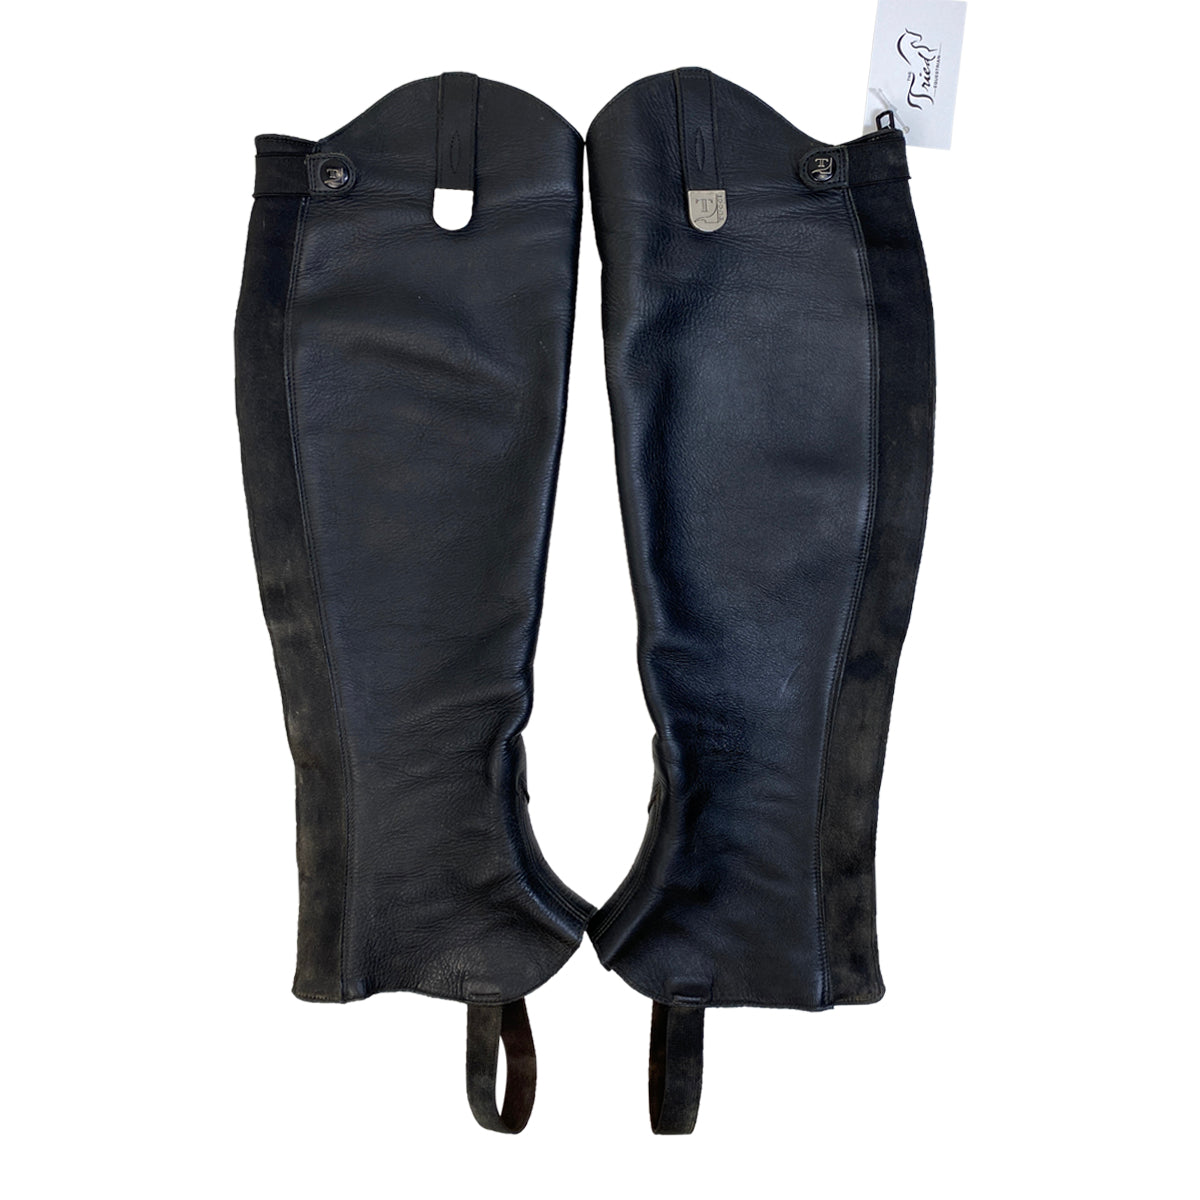 Tucci 'Everytime' Classic Half Chaps in Black